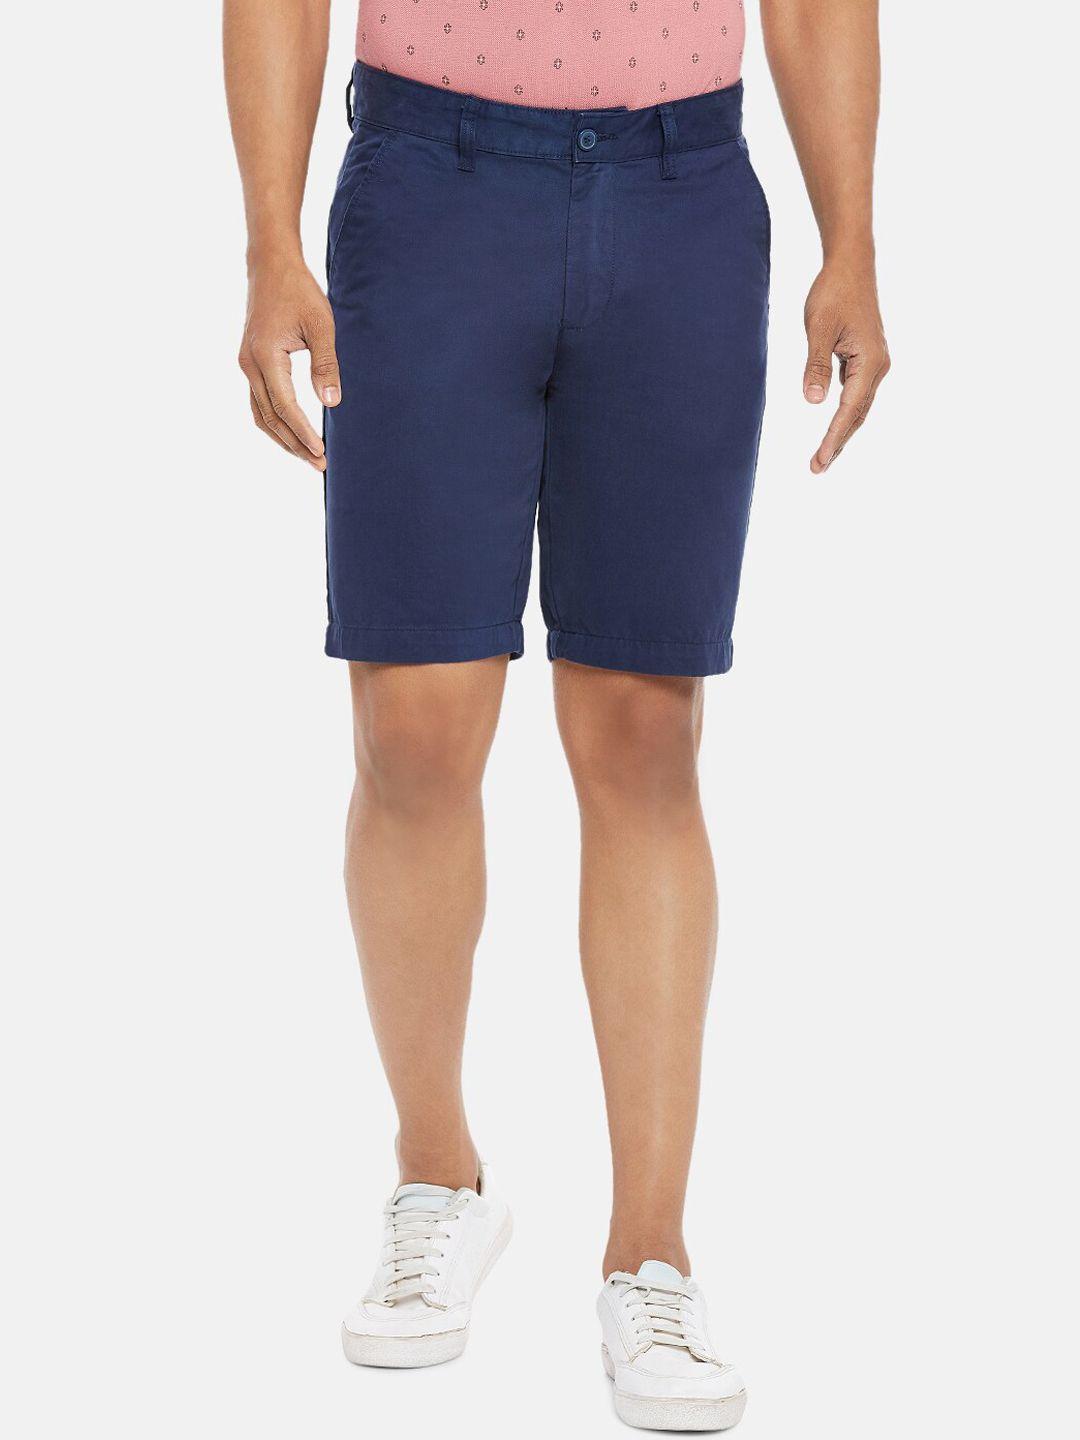 byford-by-pantaloons-men-navy-blue-slim-fit-low-rise-chino-shorts